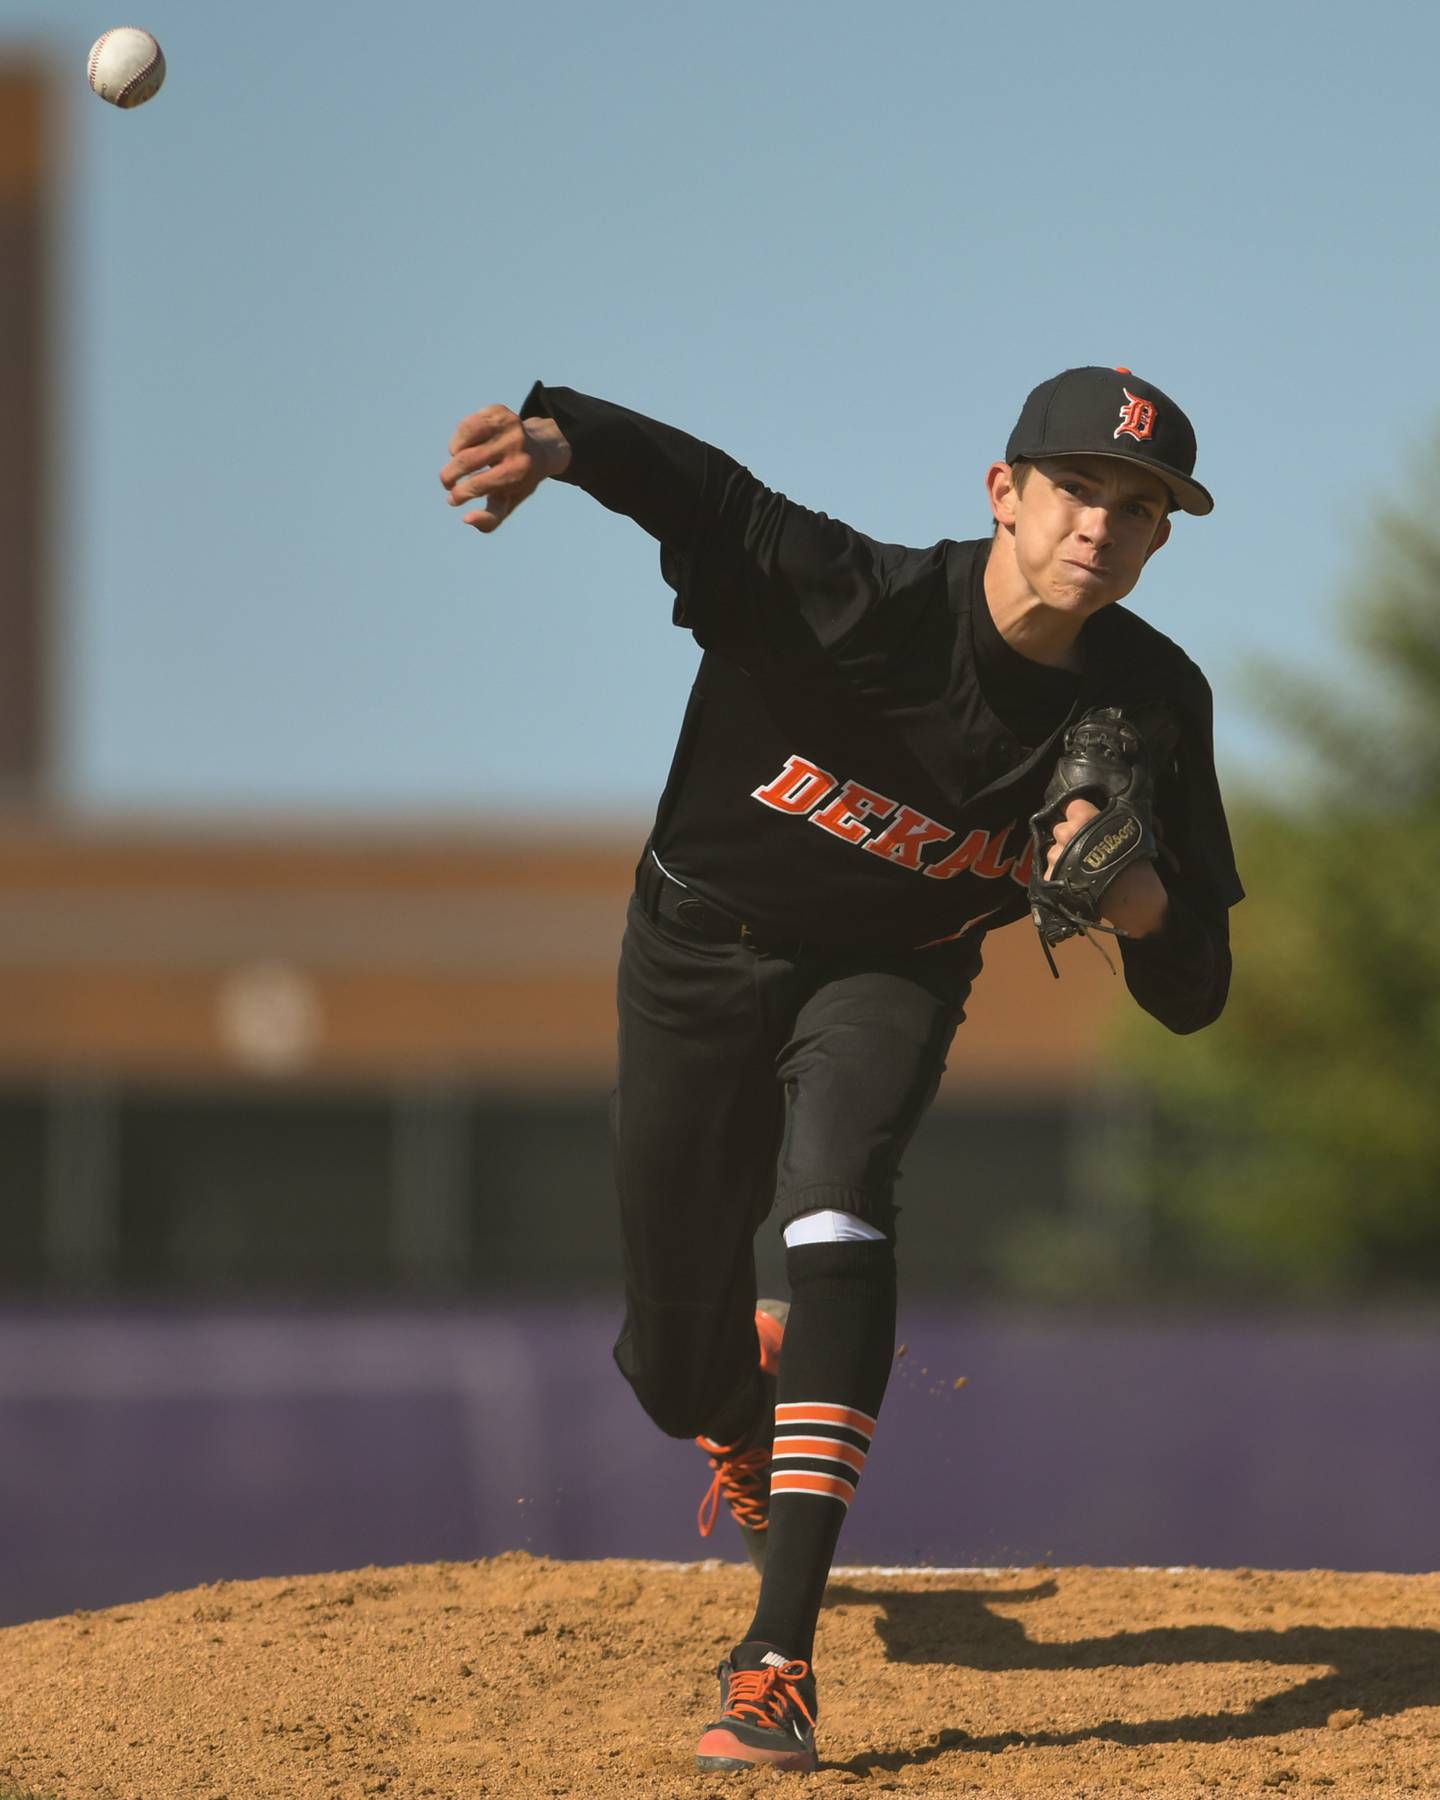 DeKalb’s pitcher Jackson Kees (1) pitches during the first inning of the regional game on Thursday May 25th while traveling to Hampshire High School to take on Hampshire.